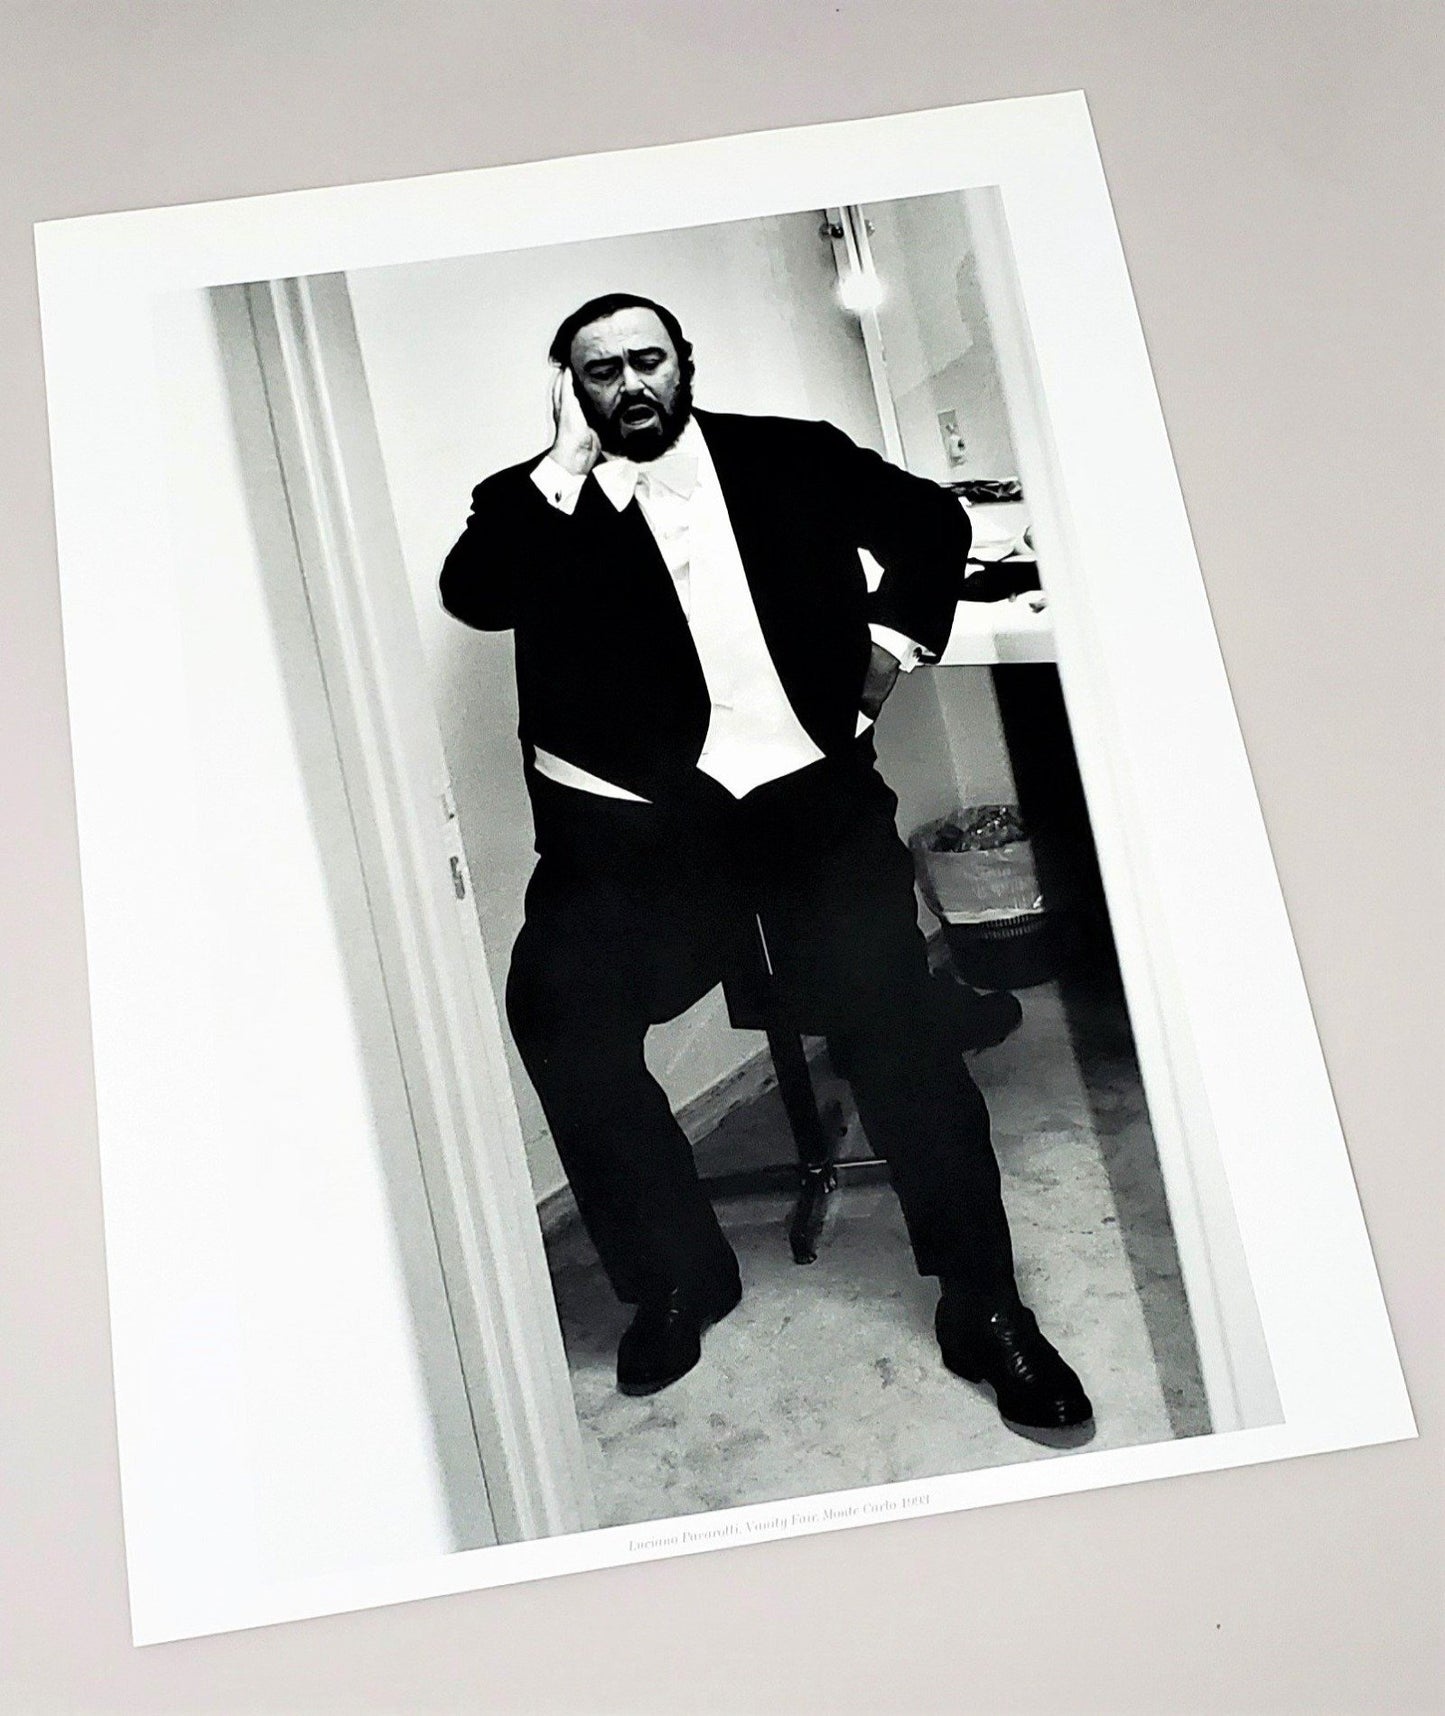 Luciano Pavarotti Poster Photographed By Helmut Newton Available In AREA51GALLERY